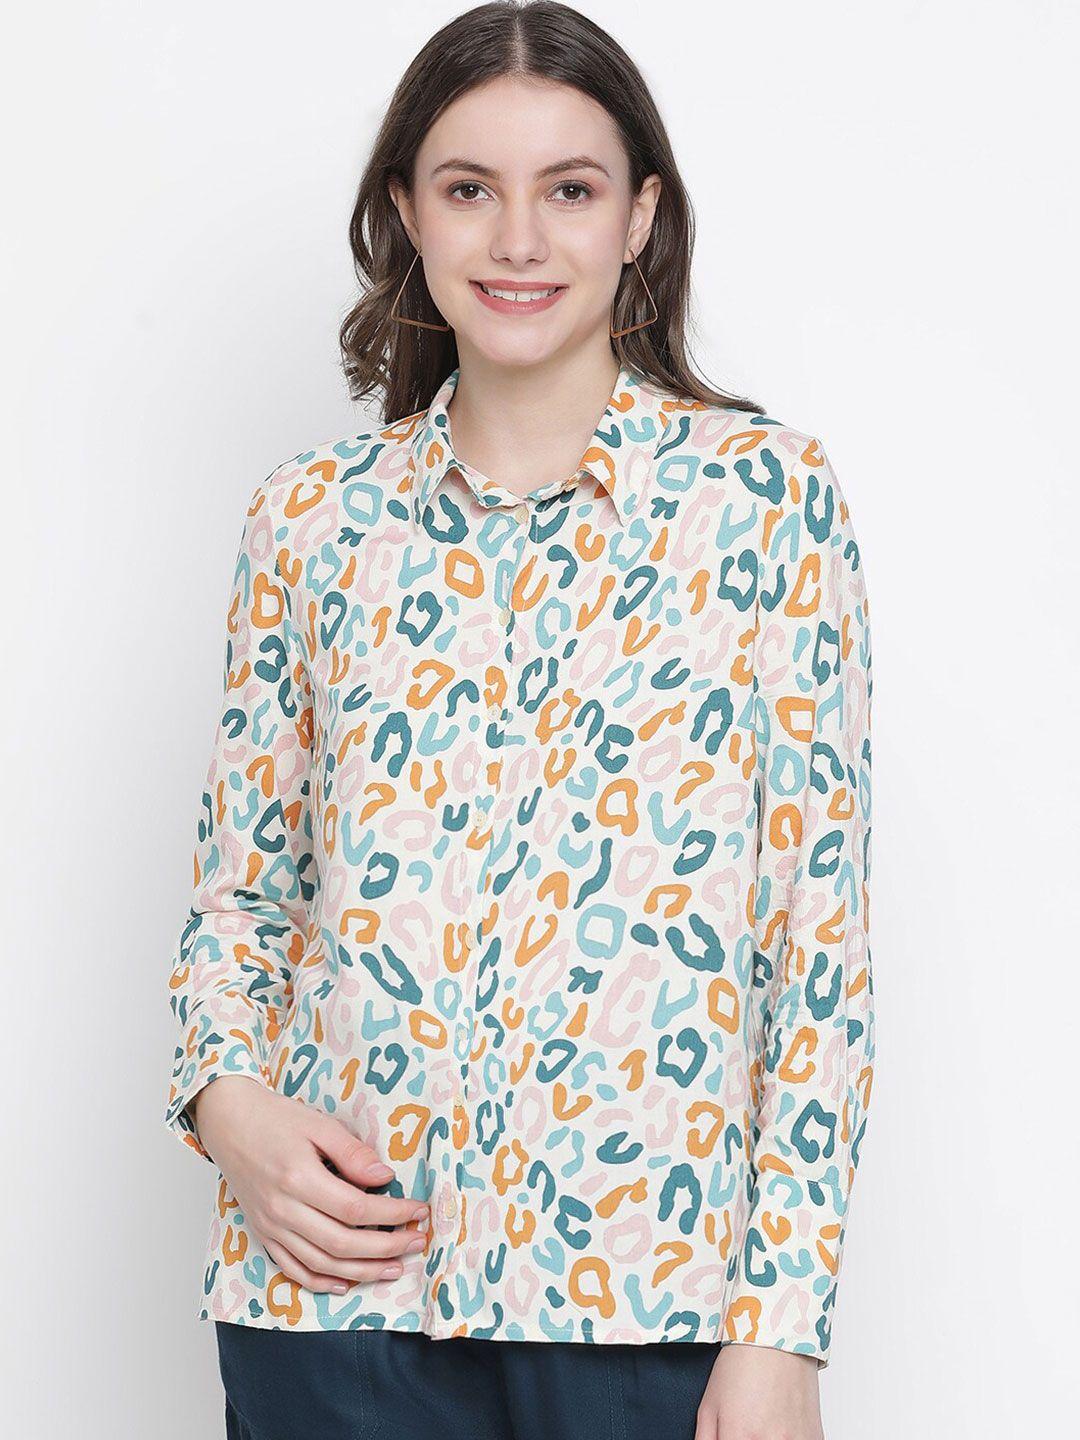 oxolloxo women multicoloured classic abstract printed casual shirt